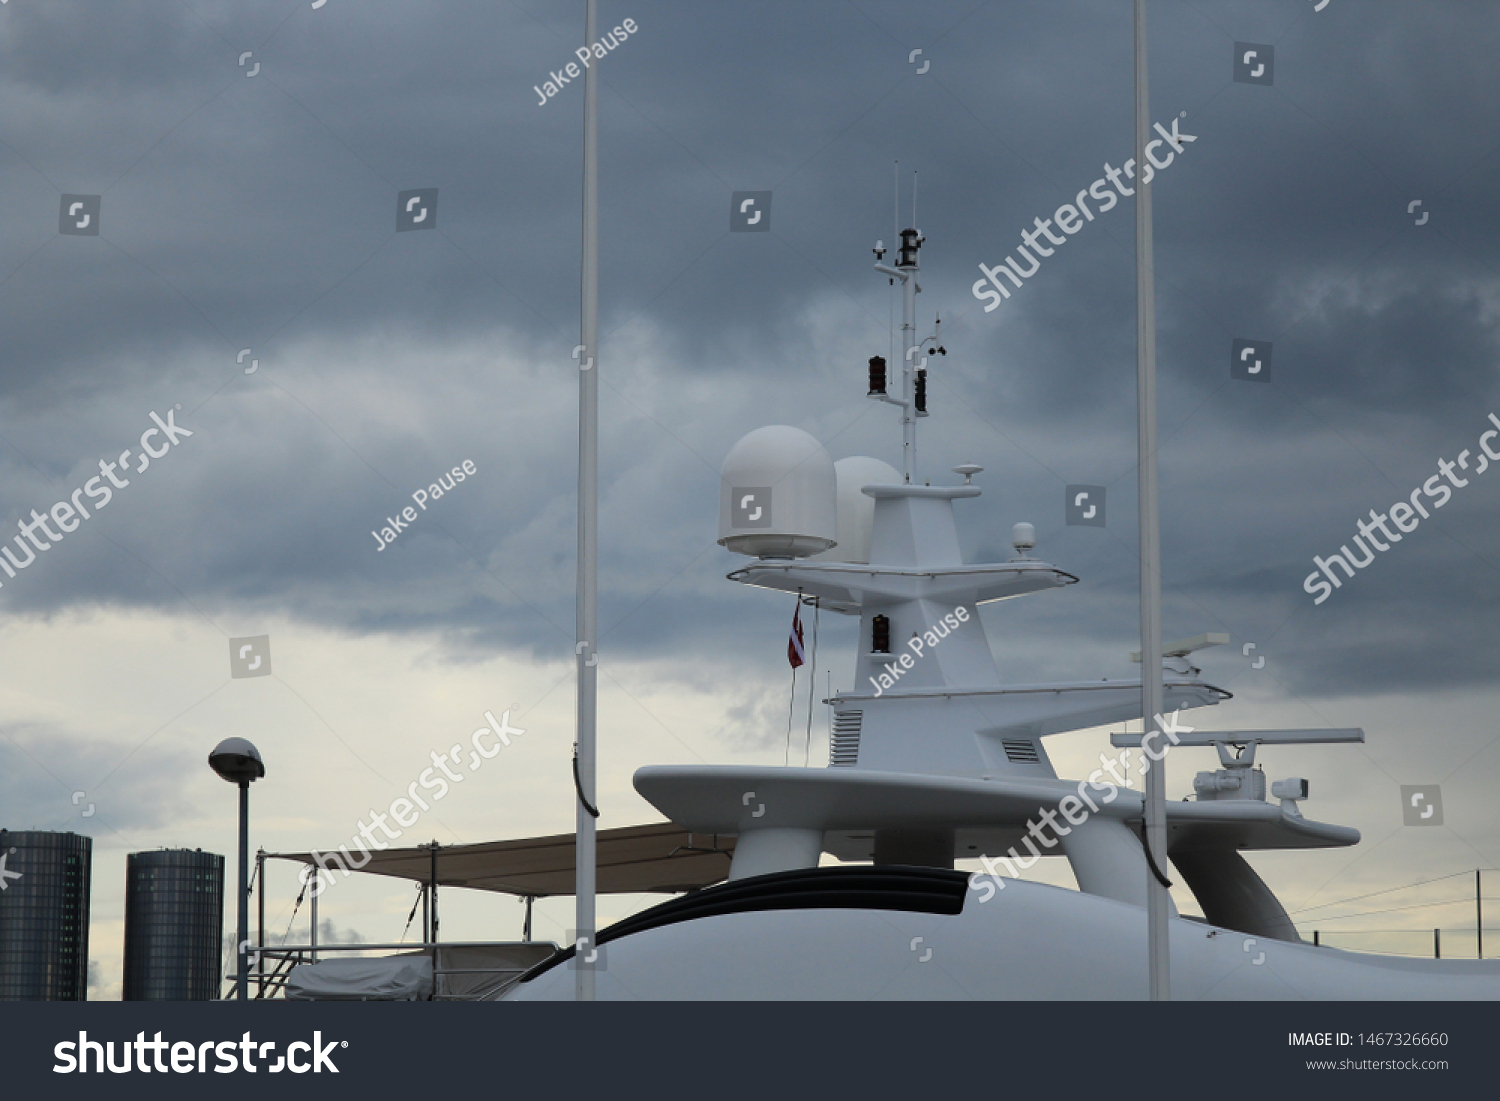 yacht navigation locator. Felling a yacht against a background of gray clouds #1467326660